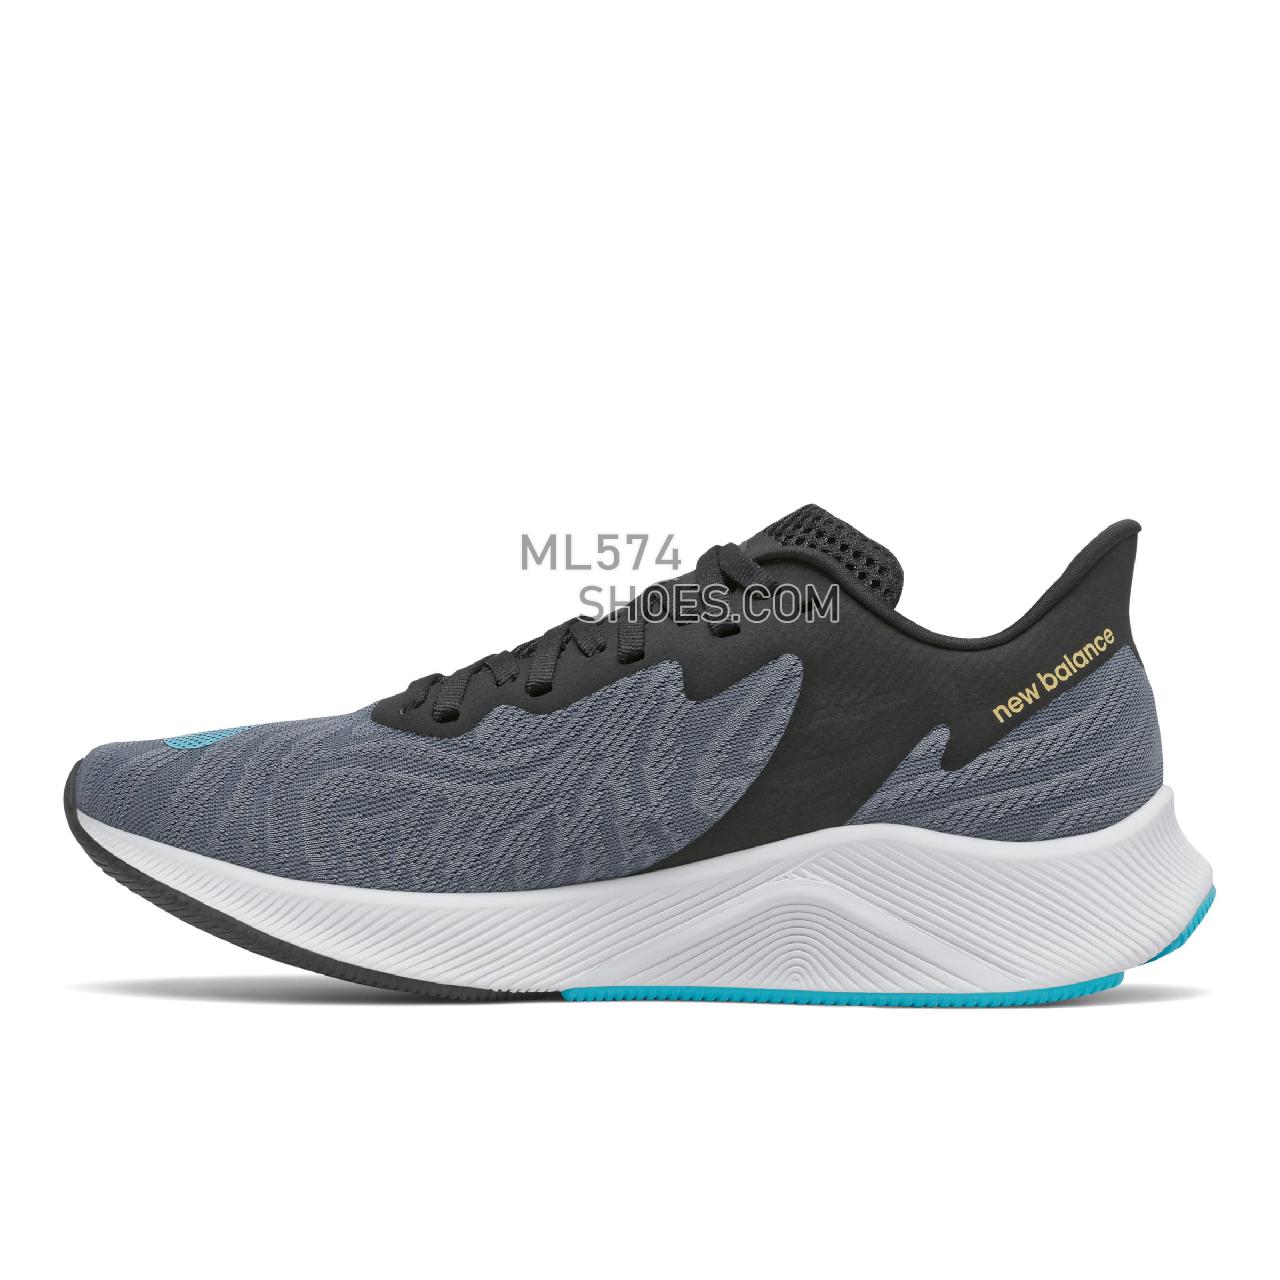 New Balance FuelCell Prism - Men's Stability Running - Ocean Grey with Virtual Sky - MFCPZCG